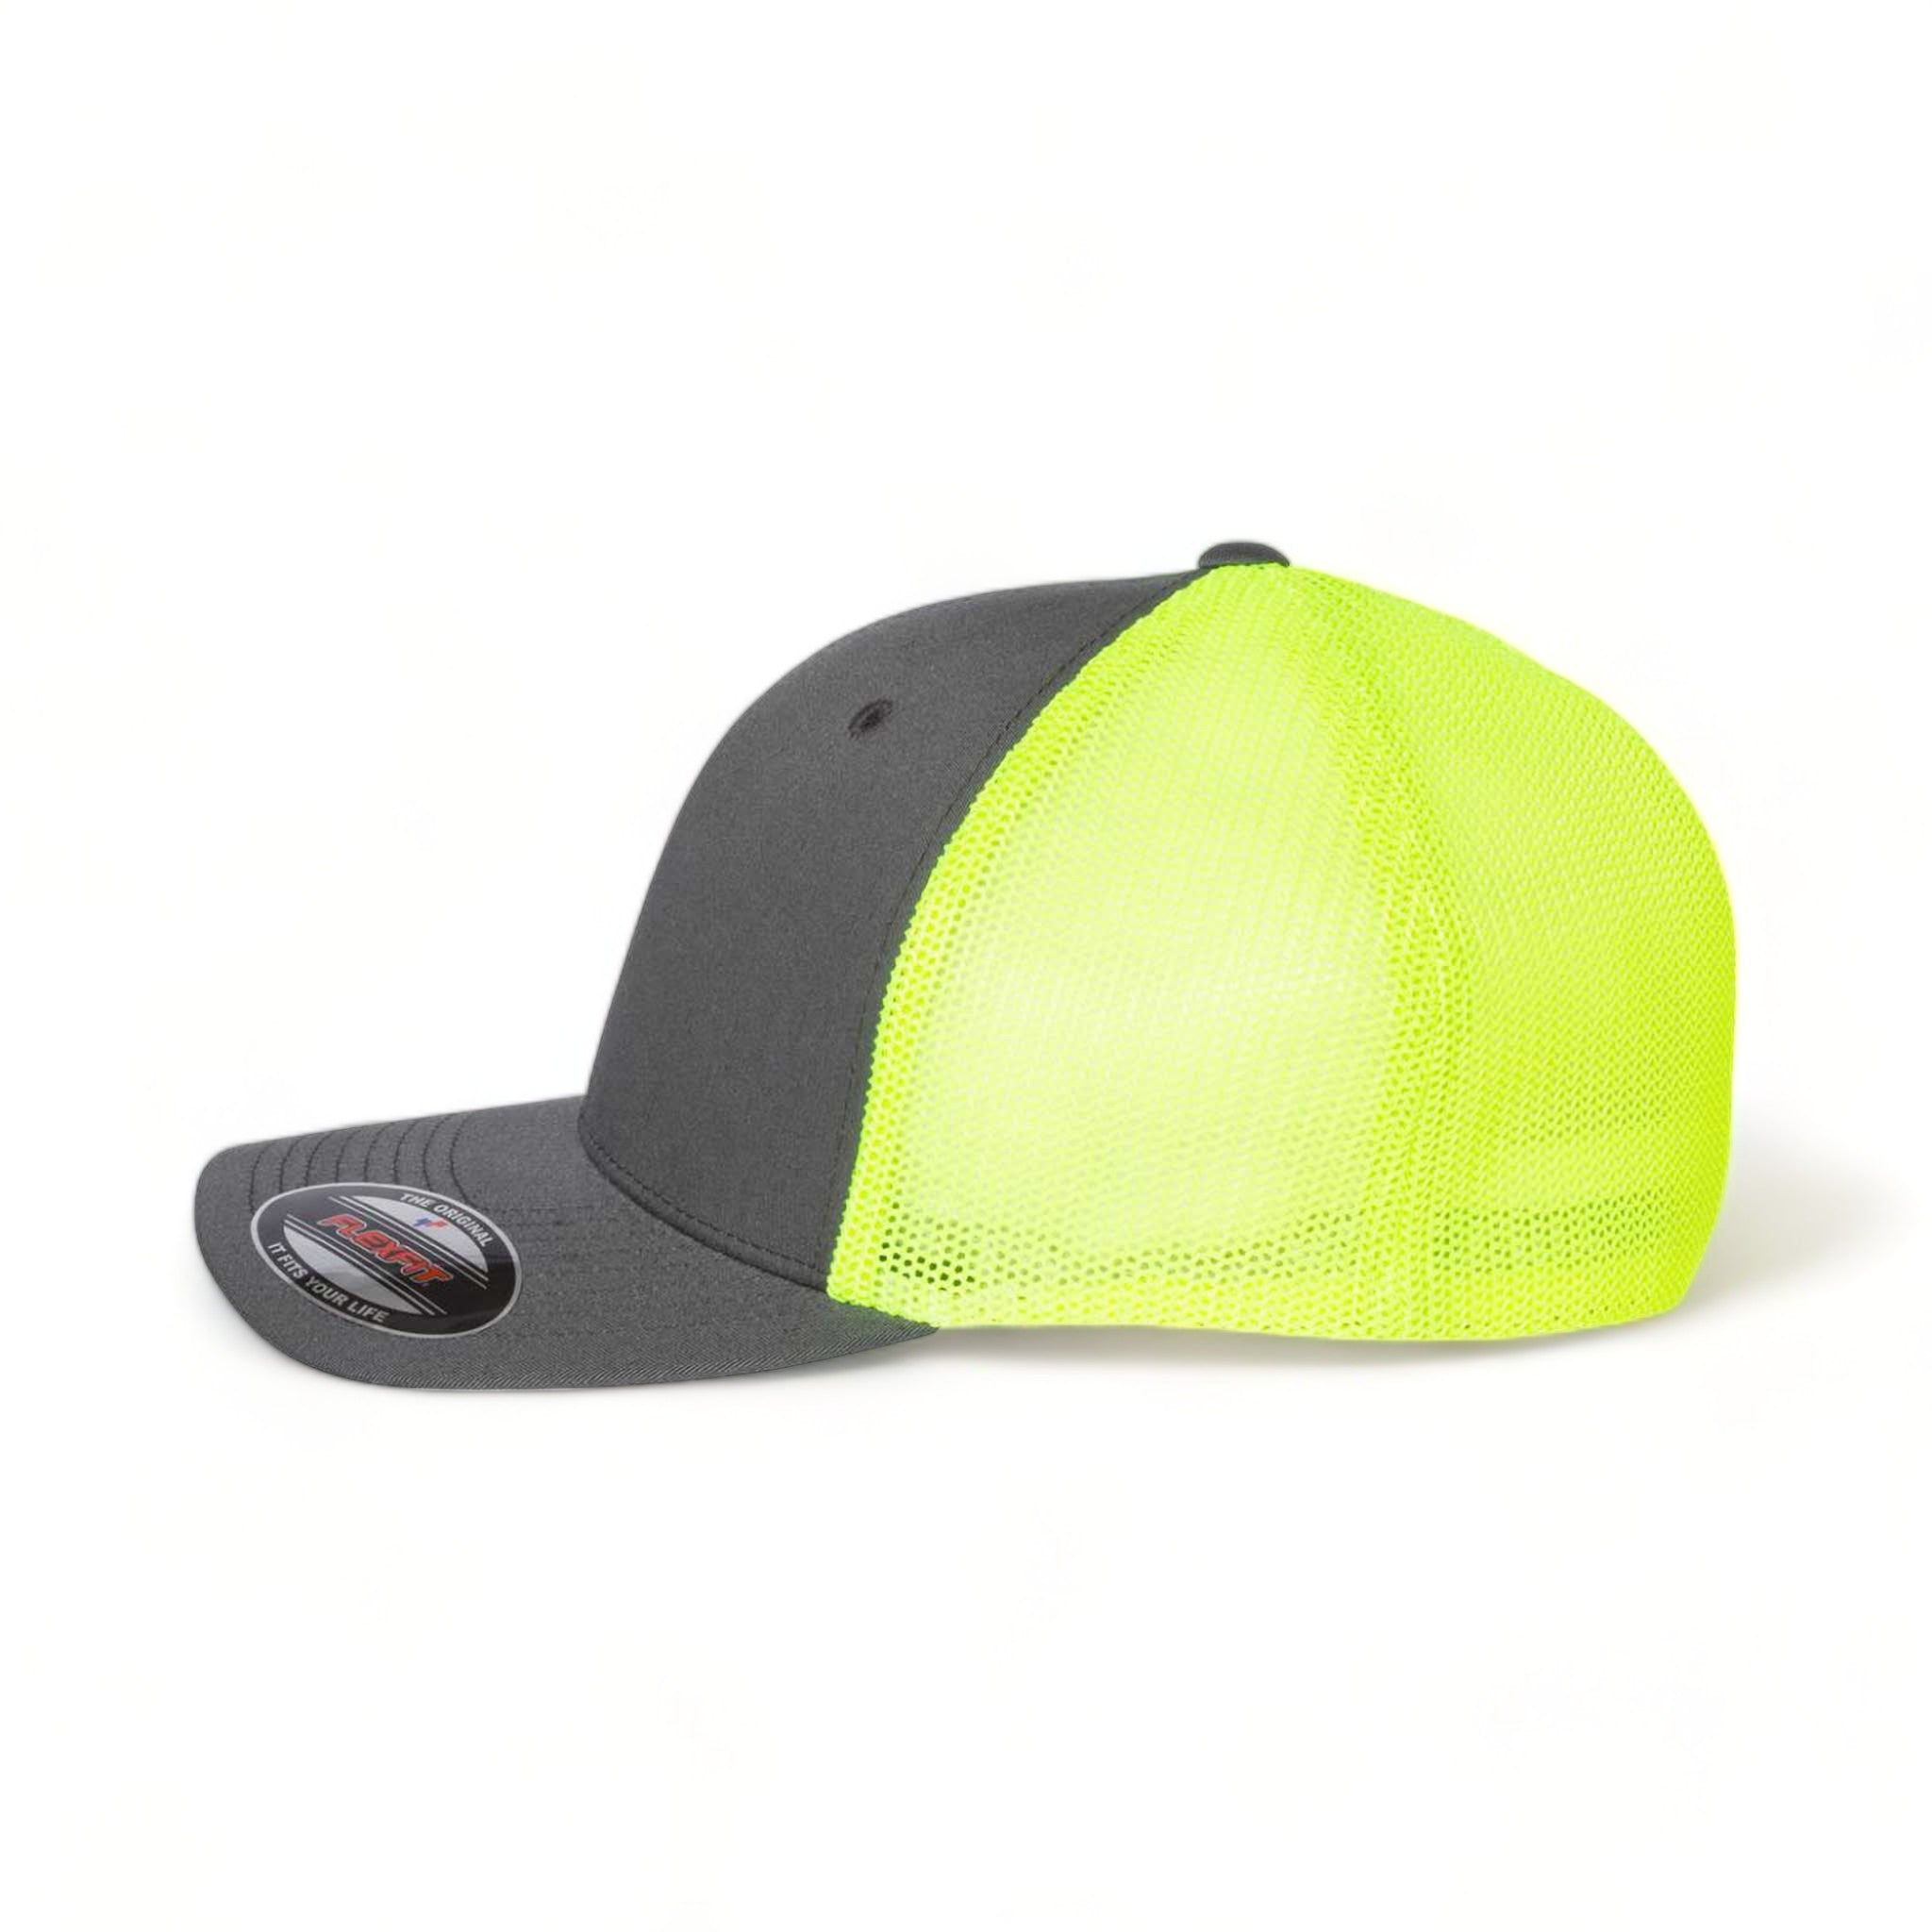 Side view of Flexfit 6511 custom hat in charcoal and neon yellow